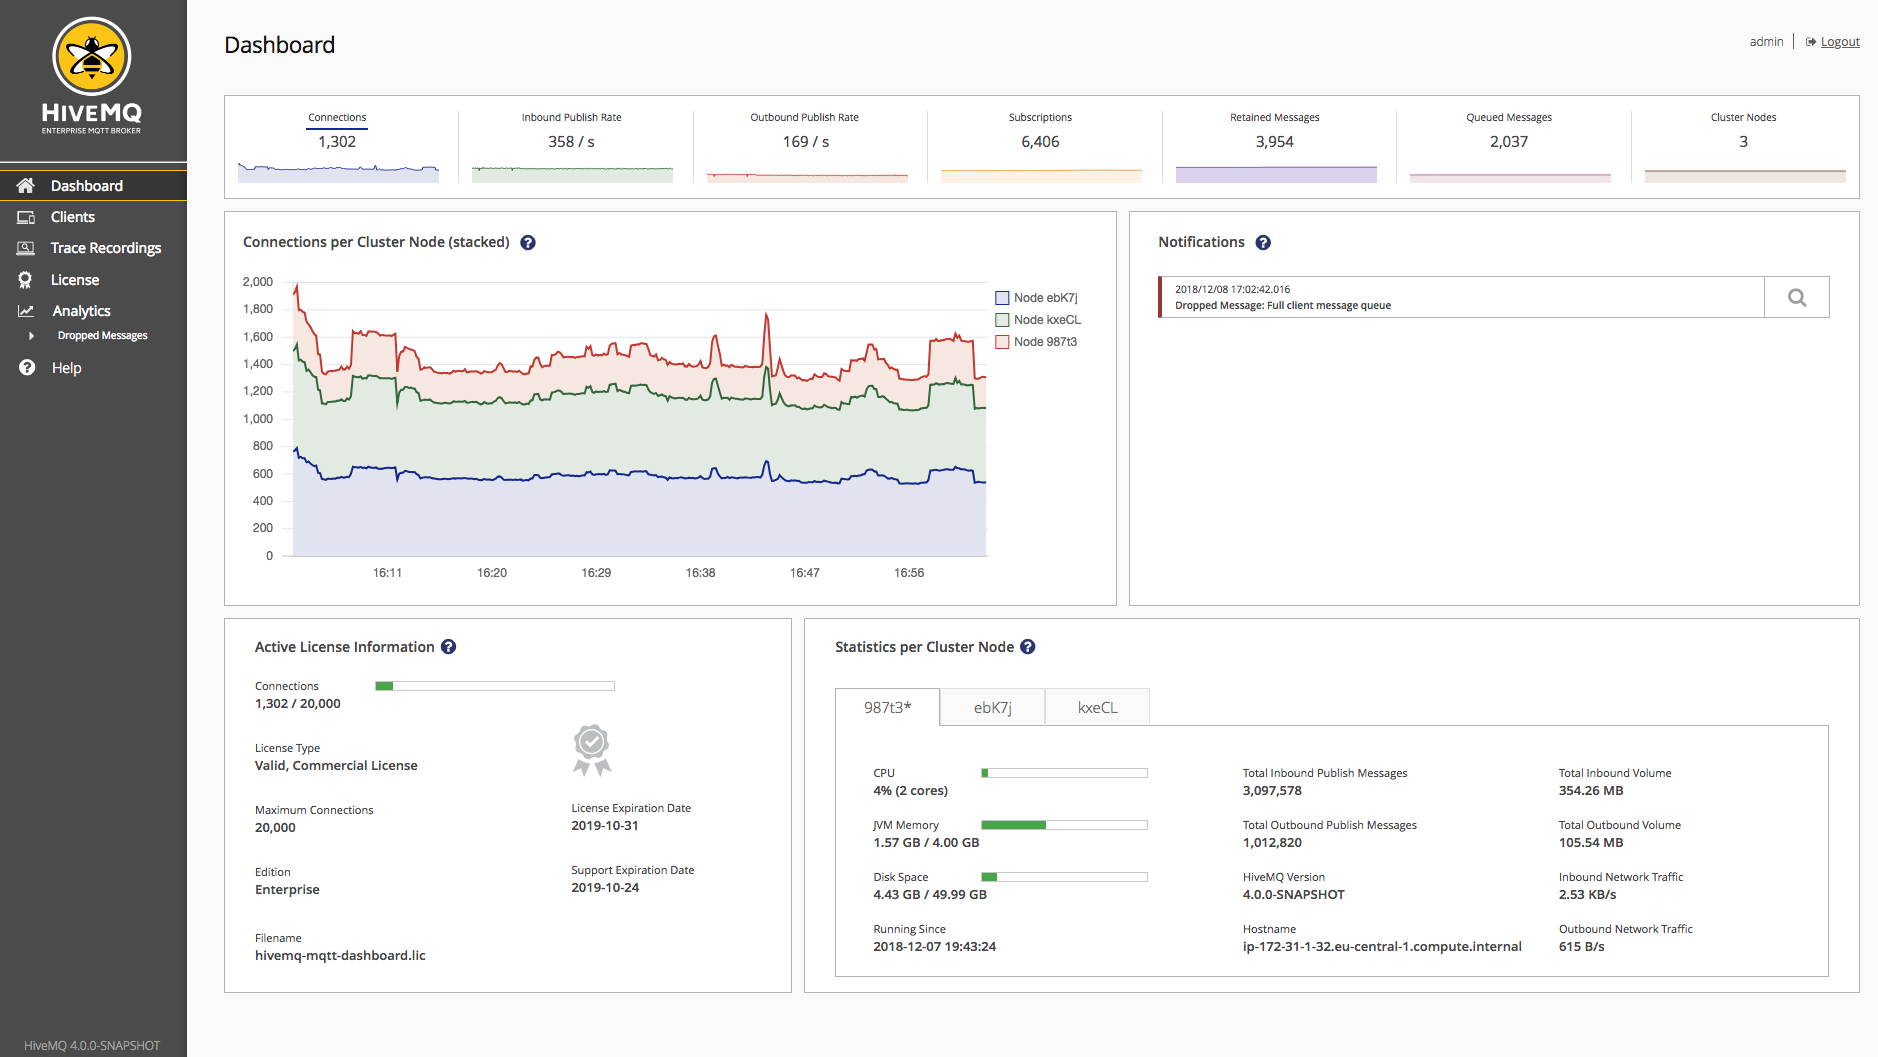 Overview of the Dashboard page